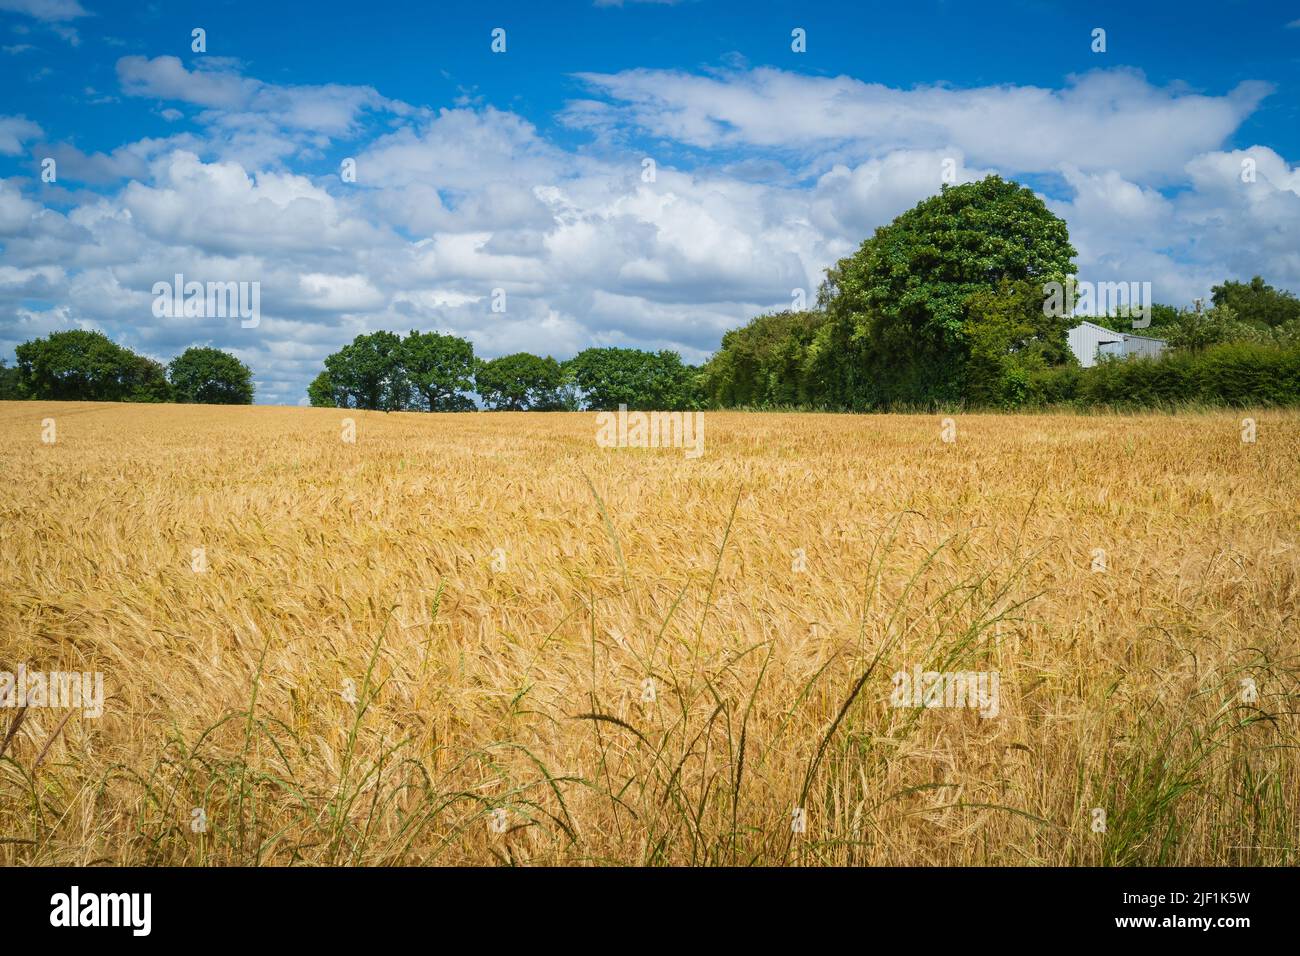 New summer crop fields heading towards harvest time in Northern England Stock Photo